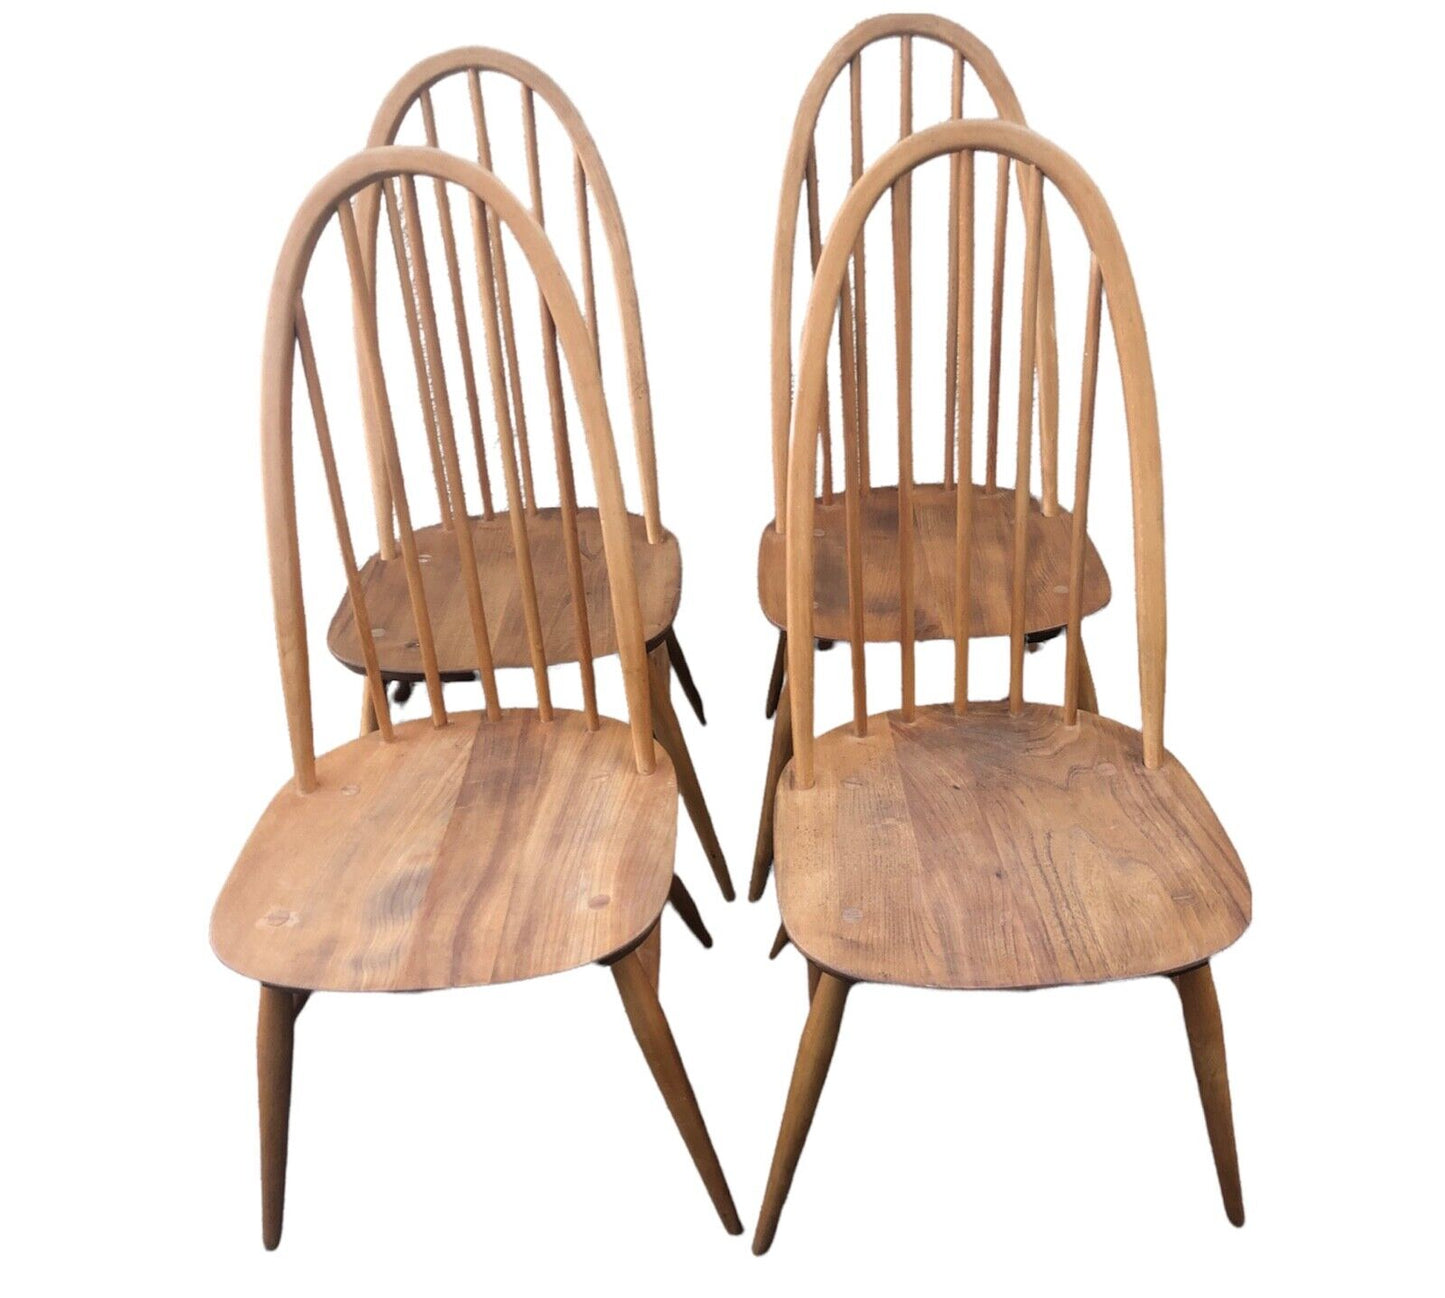 000919.....Handsome Set Of 4 Ercol Quaker Chairs ( sold )